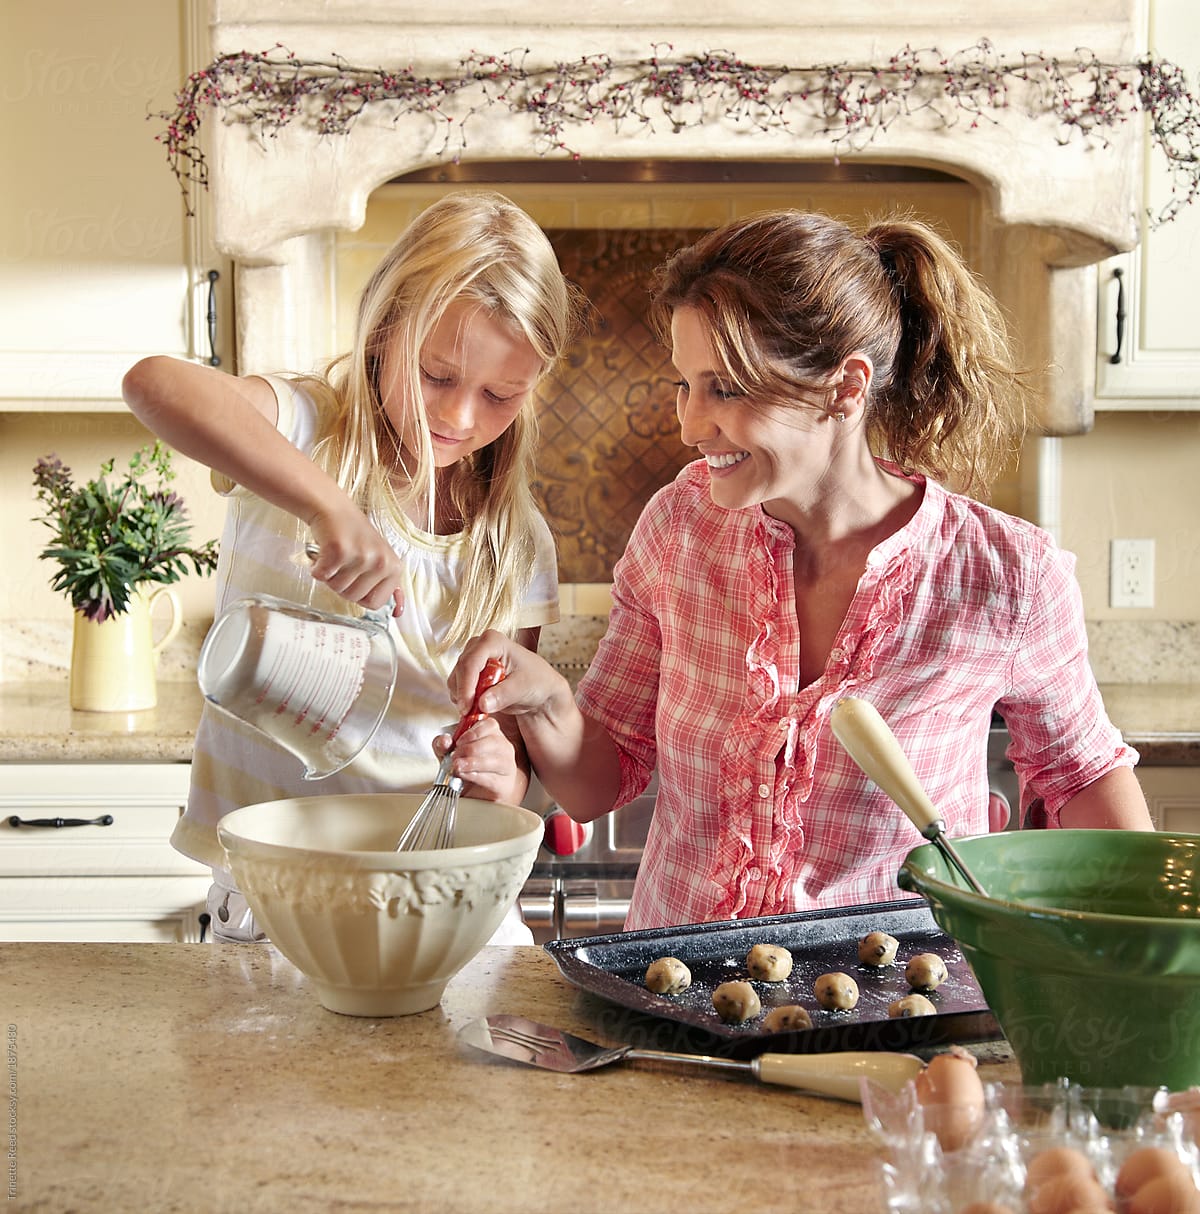 mother-and-daughter-baking-together-in-the-kitchen-portrinette-reed